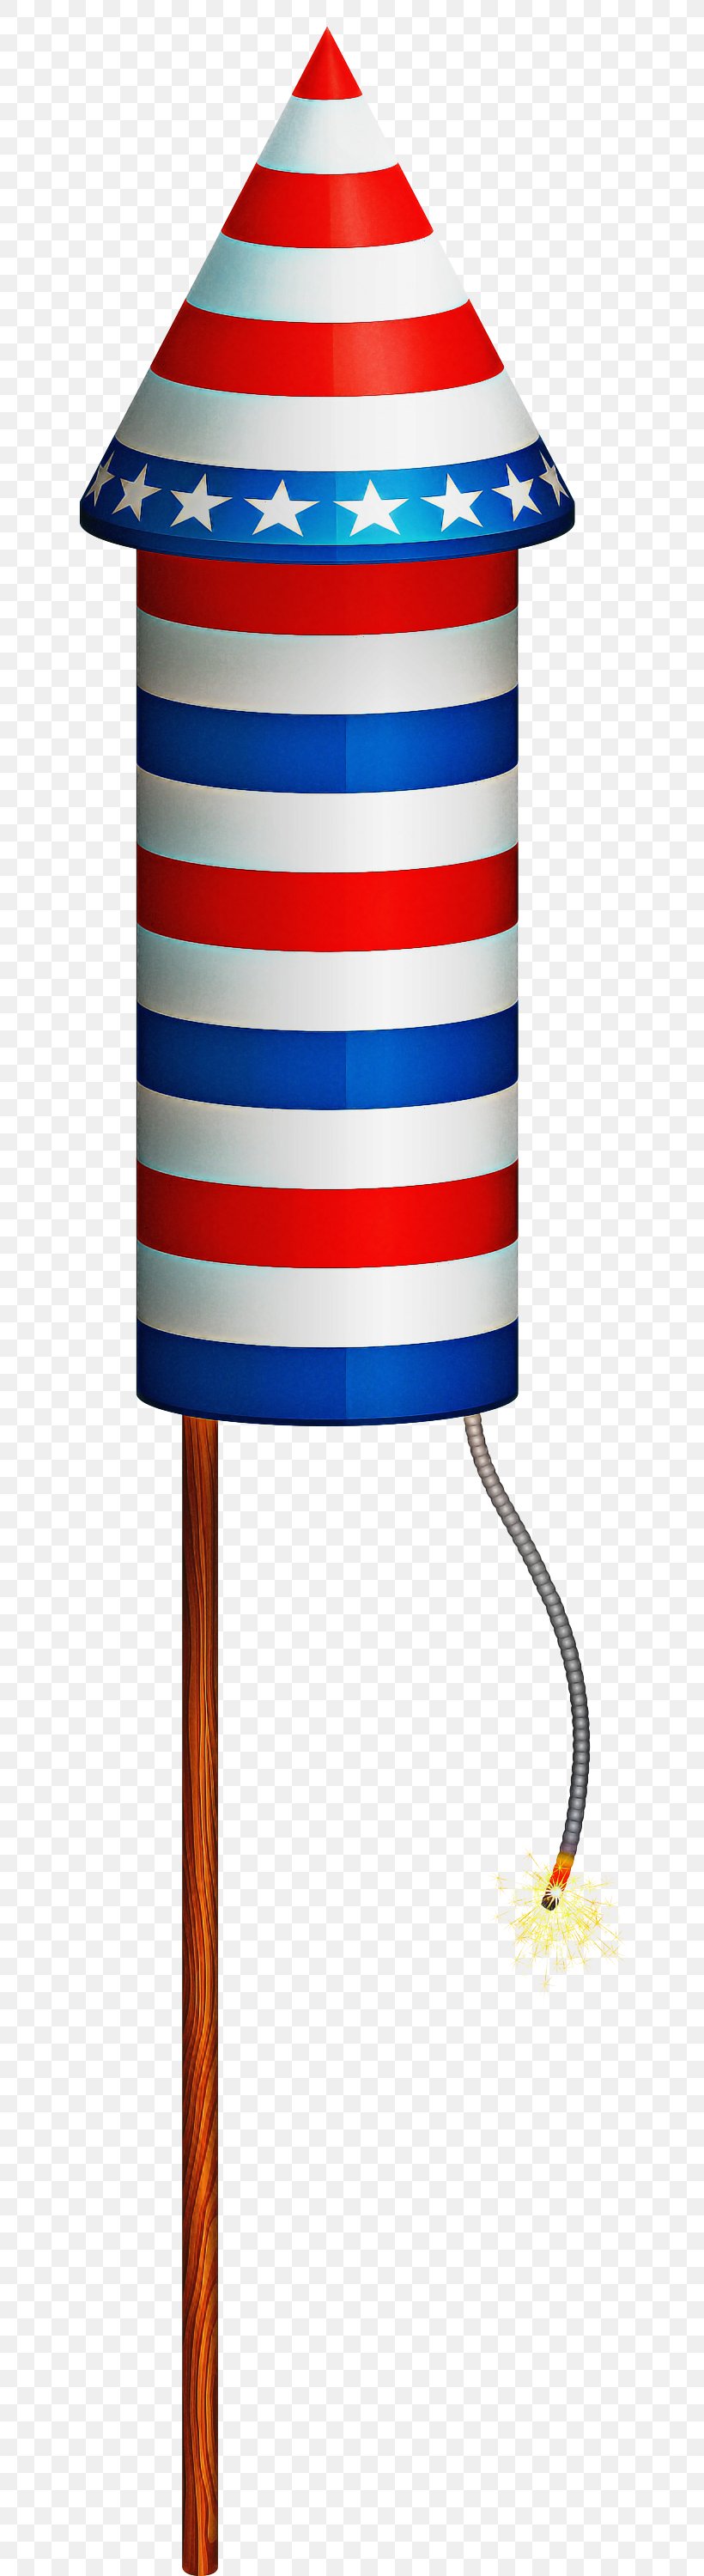 Flag Electric Blue Lampshade, PNG, 717x3000px, Flag, Electric Blue, Lampshade Download Free